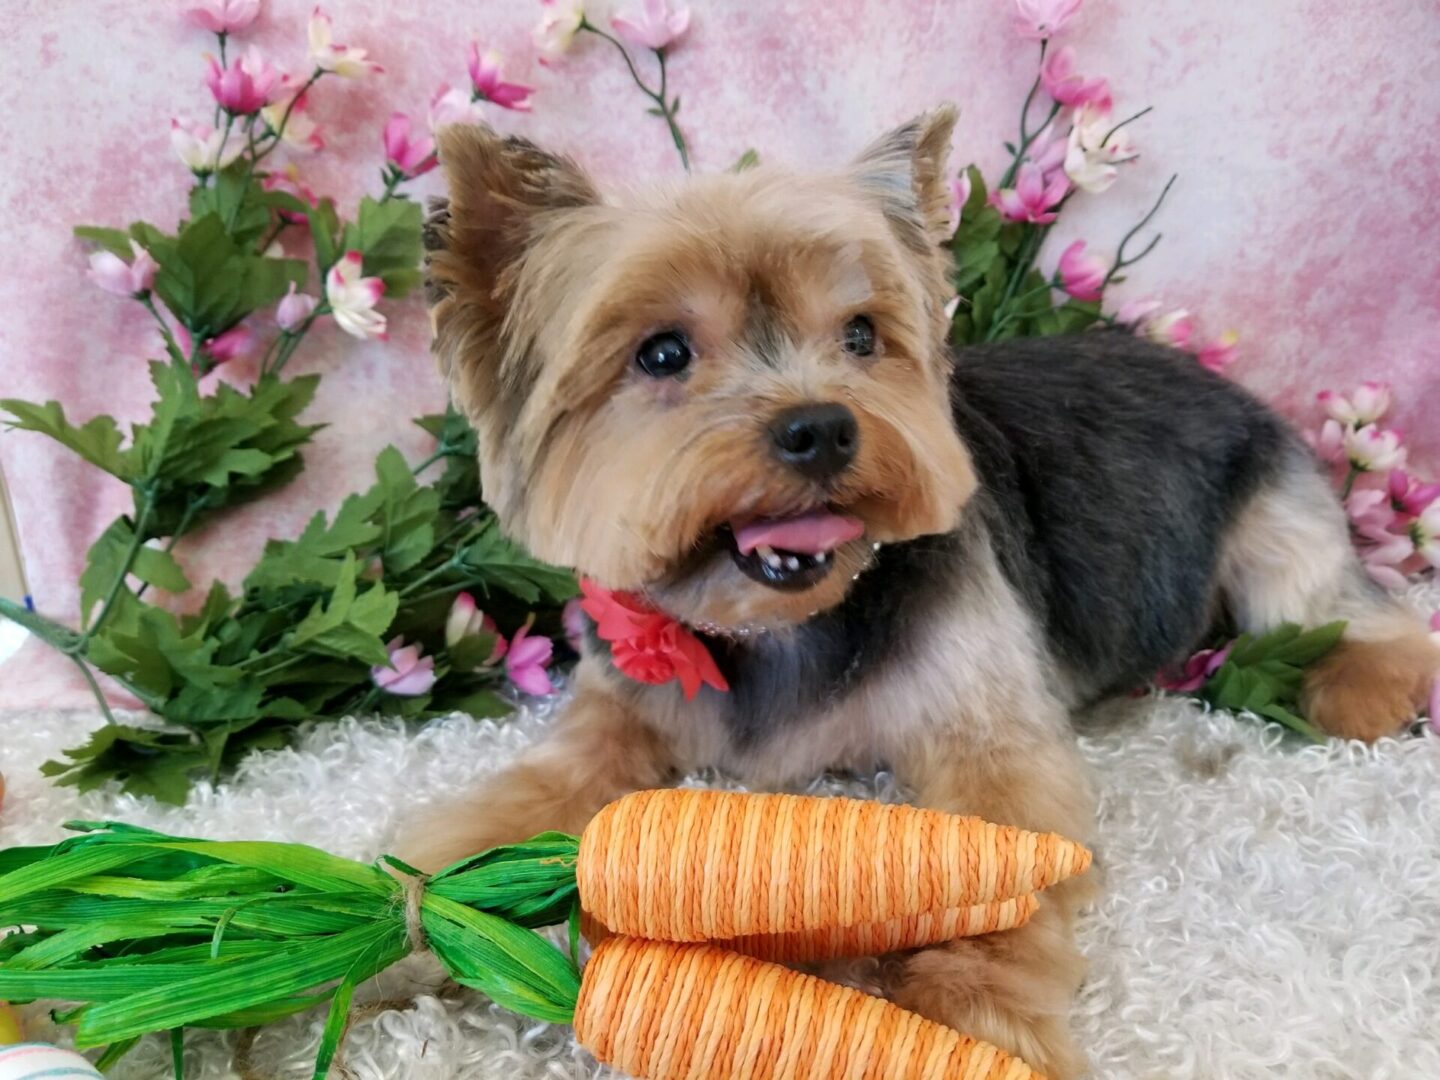 A small dog with two carrot toys